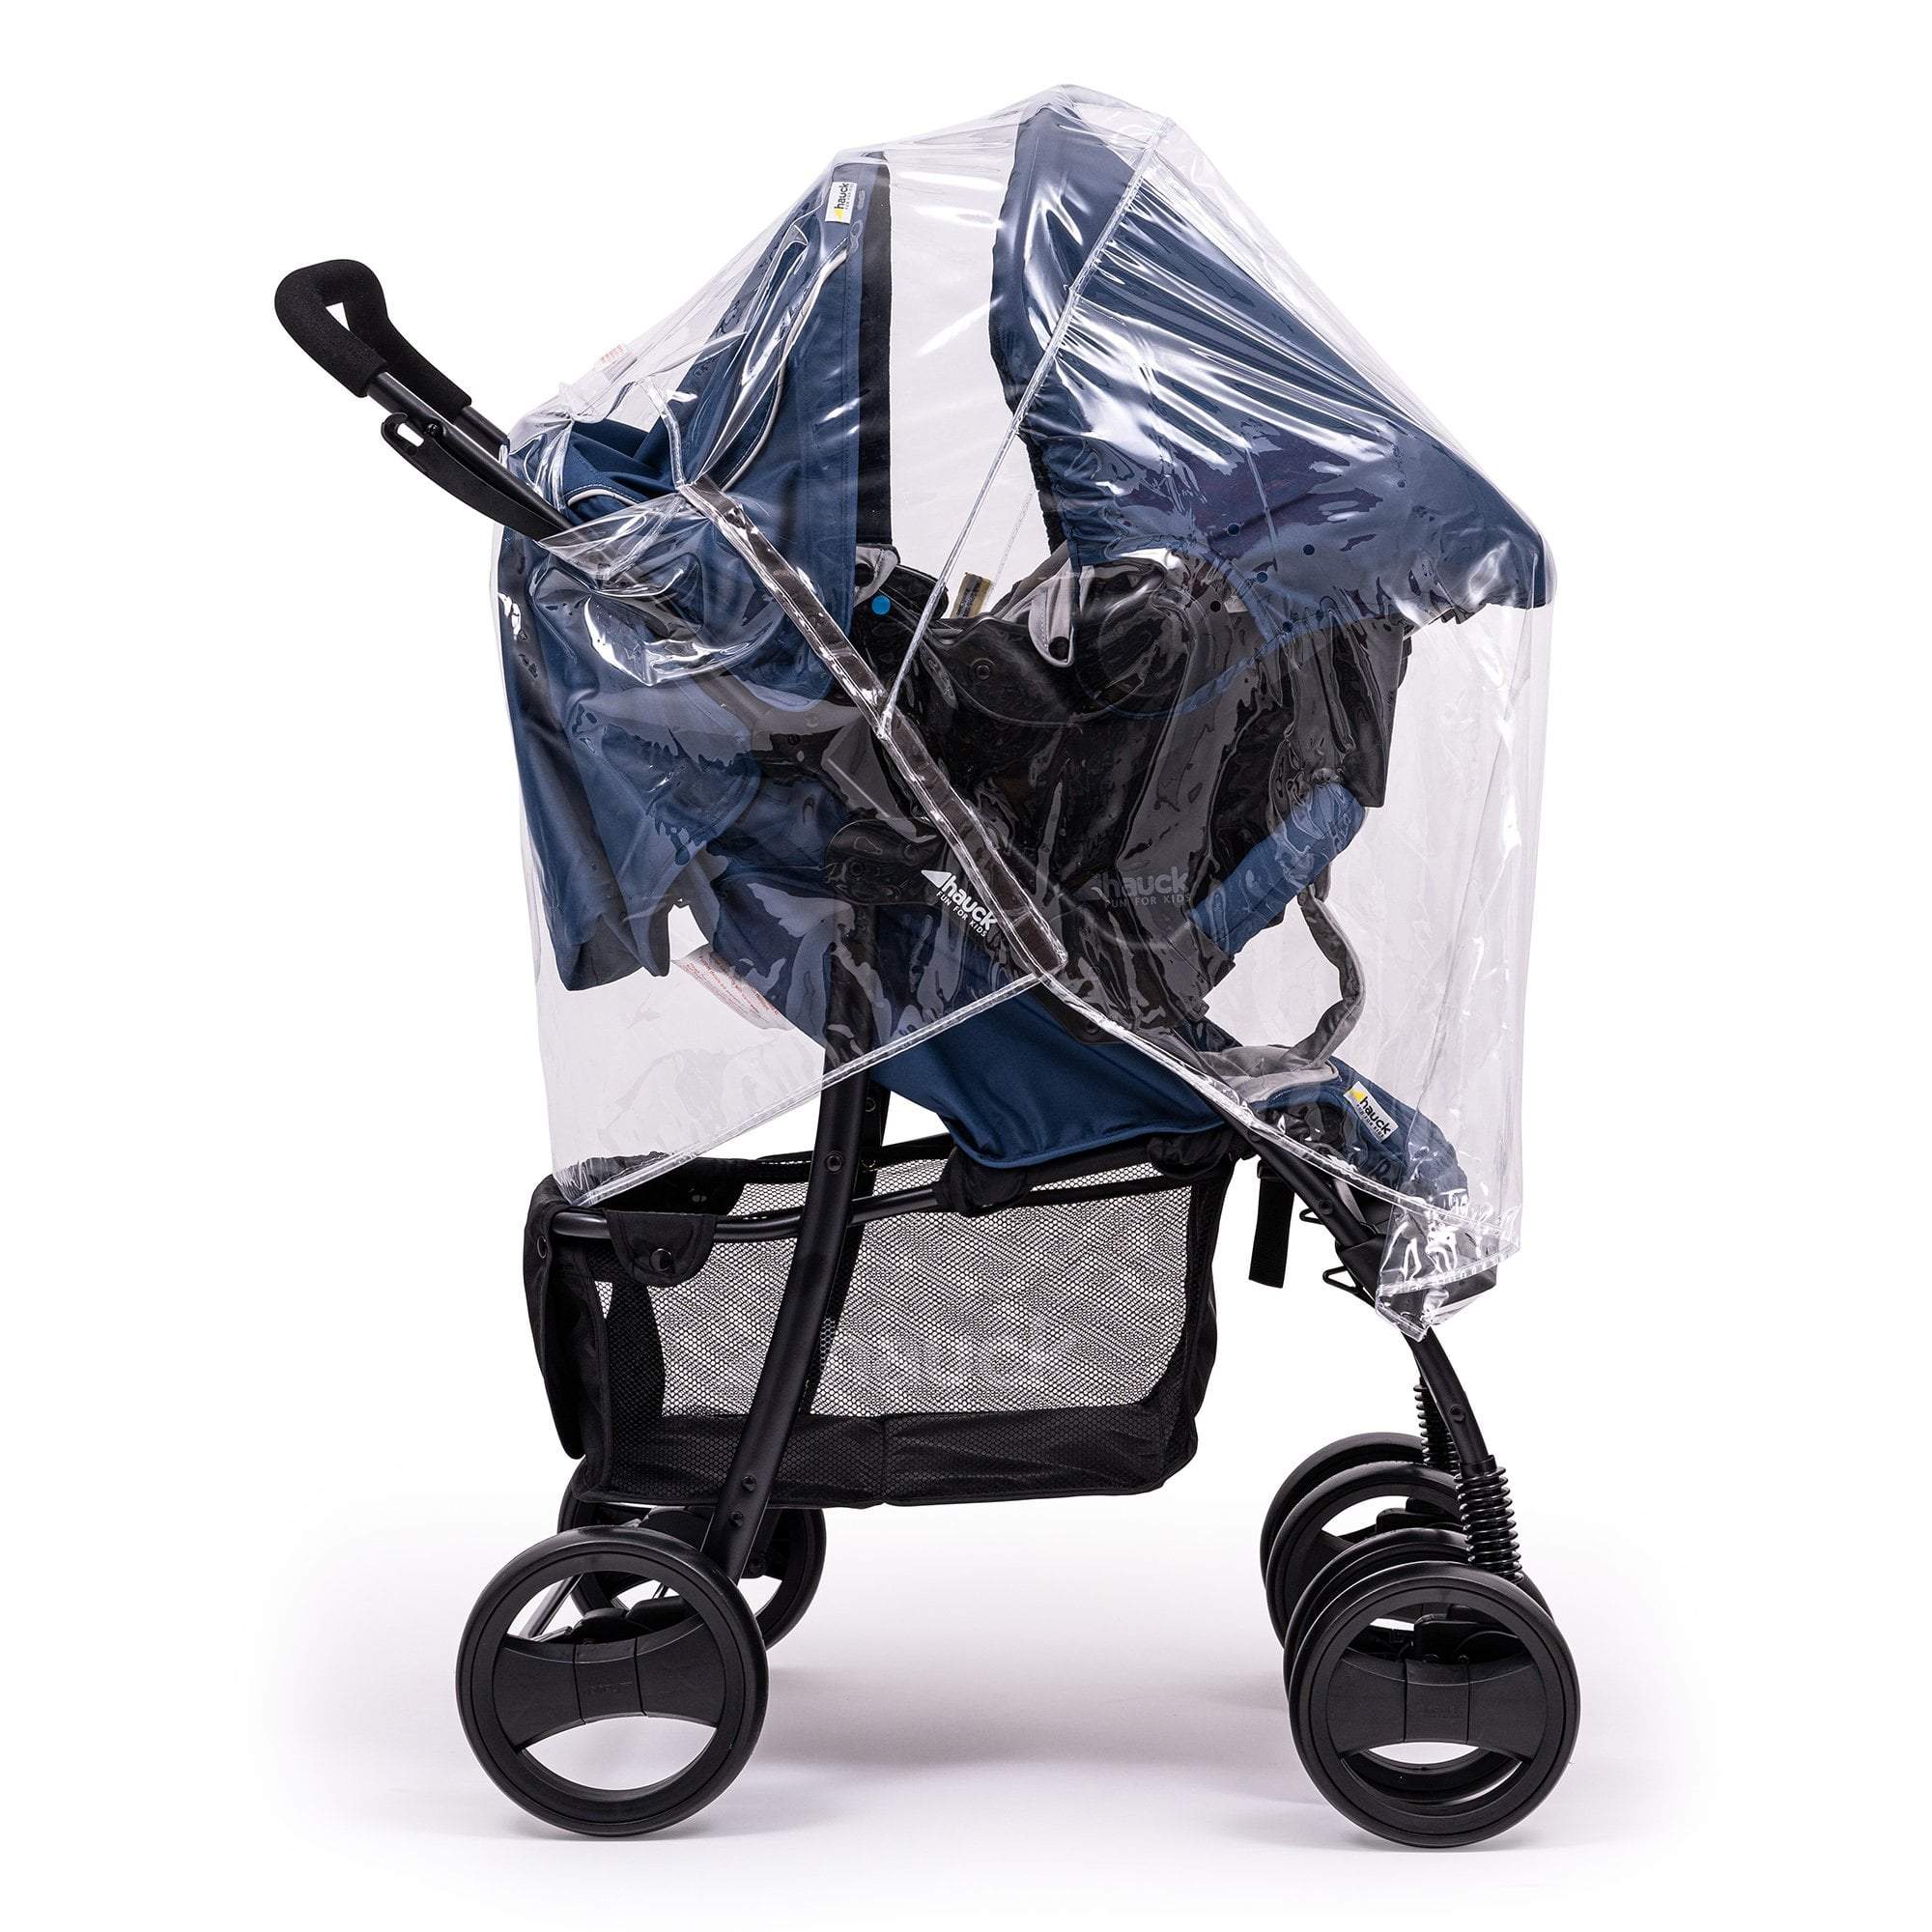 Travel System Raincover Compatible with Esprit - Fits All Models -  | For Your Little One